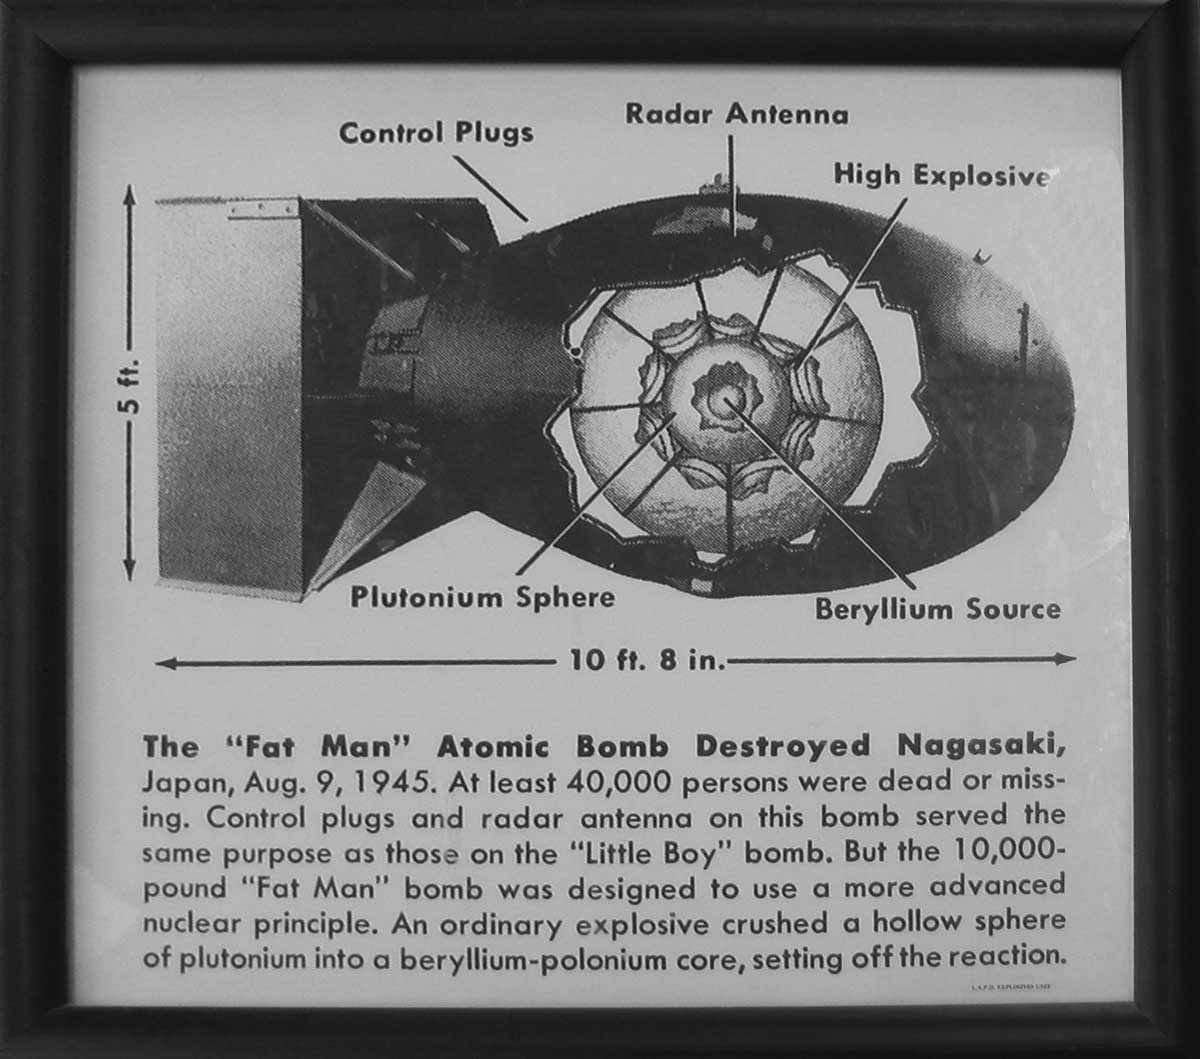 Diagram of the “Fat Man” bomb, showcasing the plutonium sphere that was used to surround the bomb’s explosive core. Diagram is from Ned O’Gorman at the University of Illinois.